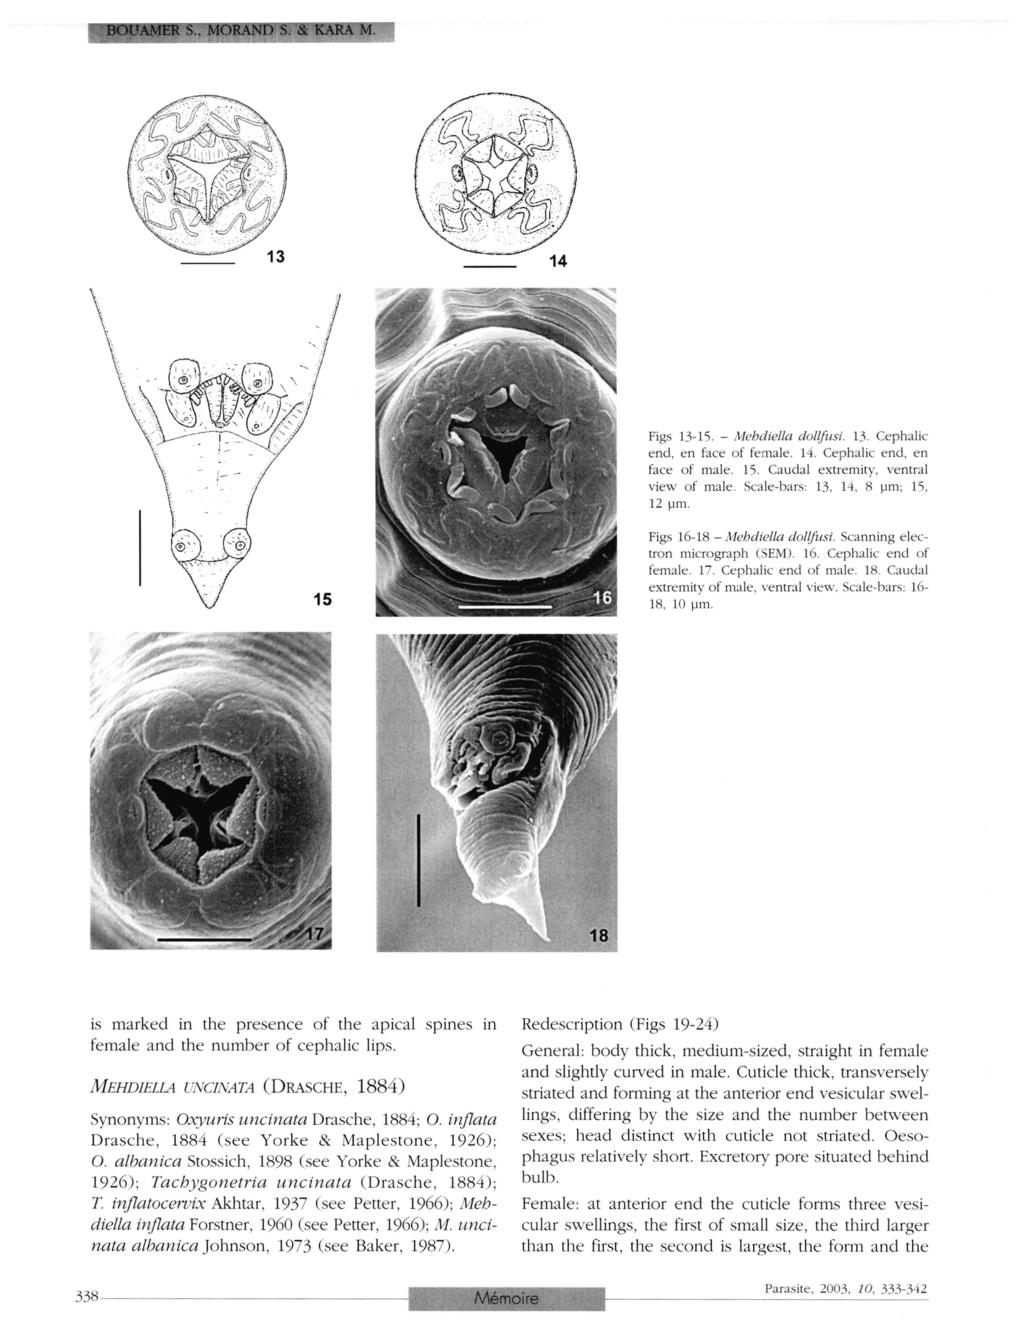 BOUAMER S., MORAND S. & KARA M. Figs 13-15. - Mehdiella dollfusi. 13. Cephalic end, en face of female. 14. Cephalic end, en face of male. 13. Caudal extremity, ventral view of male. Scale-bars: 13.